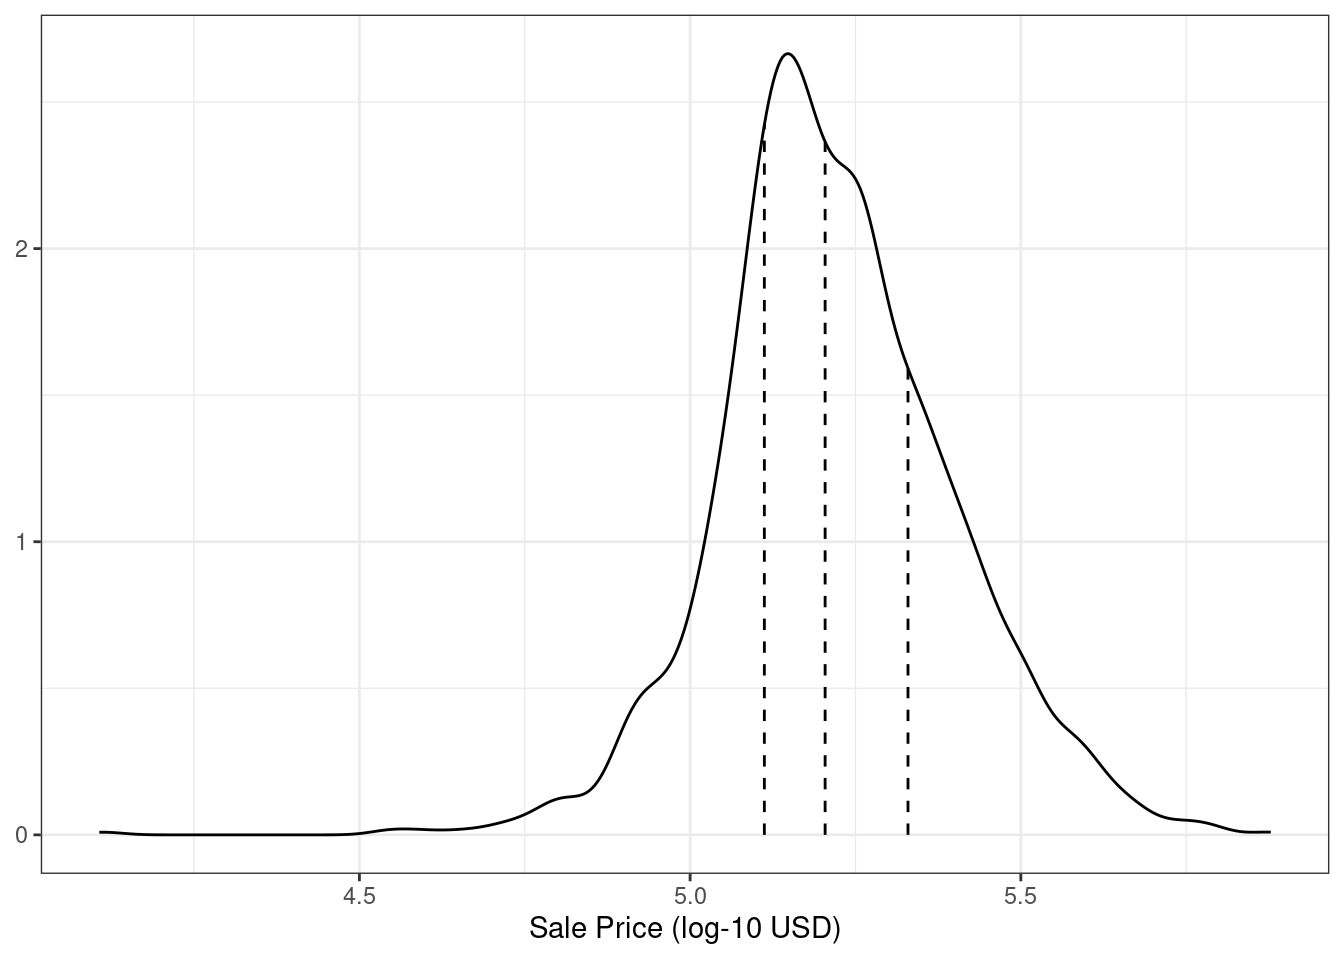 The distribution of the sale price (in log units) for the Ames housing data. The vertical lines indicate the quartiles of the data.